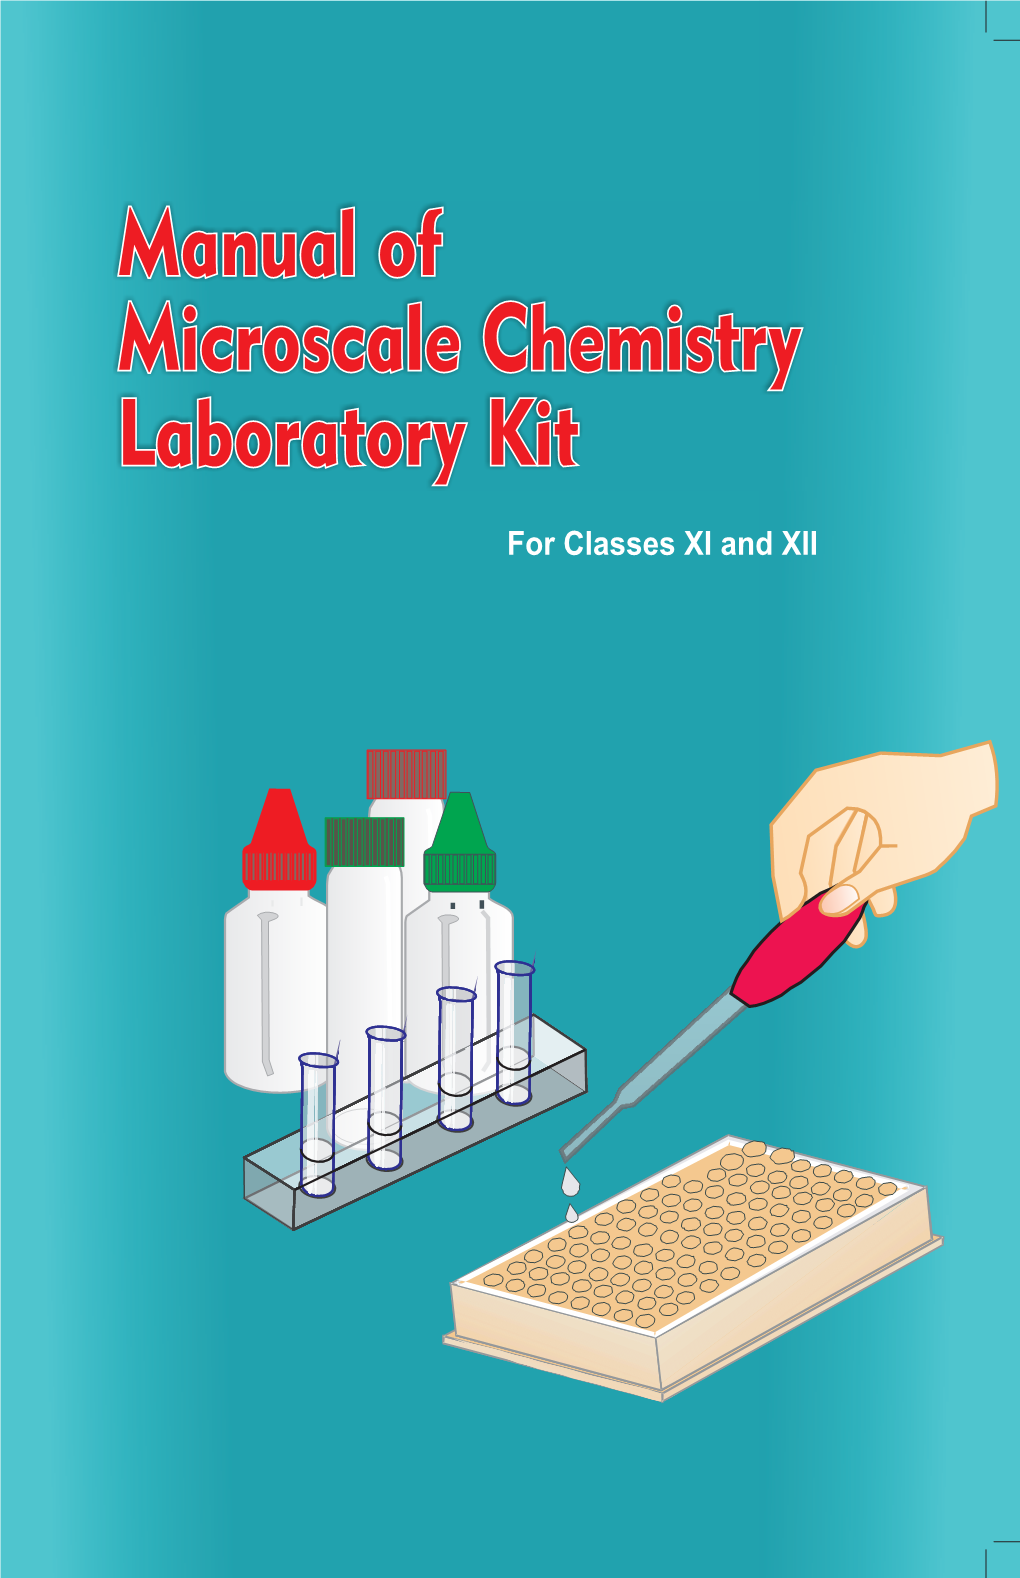 Manual of Microscale Chemistry Laboratory Kit 1 to 4.Cdr